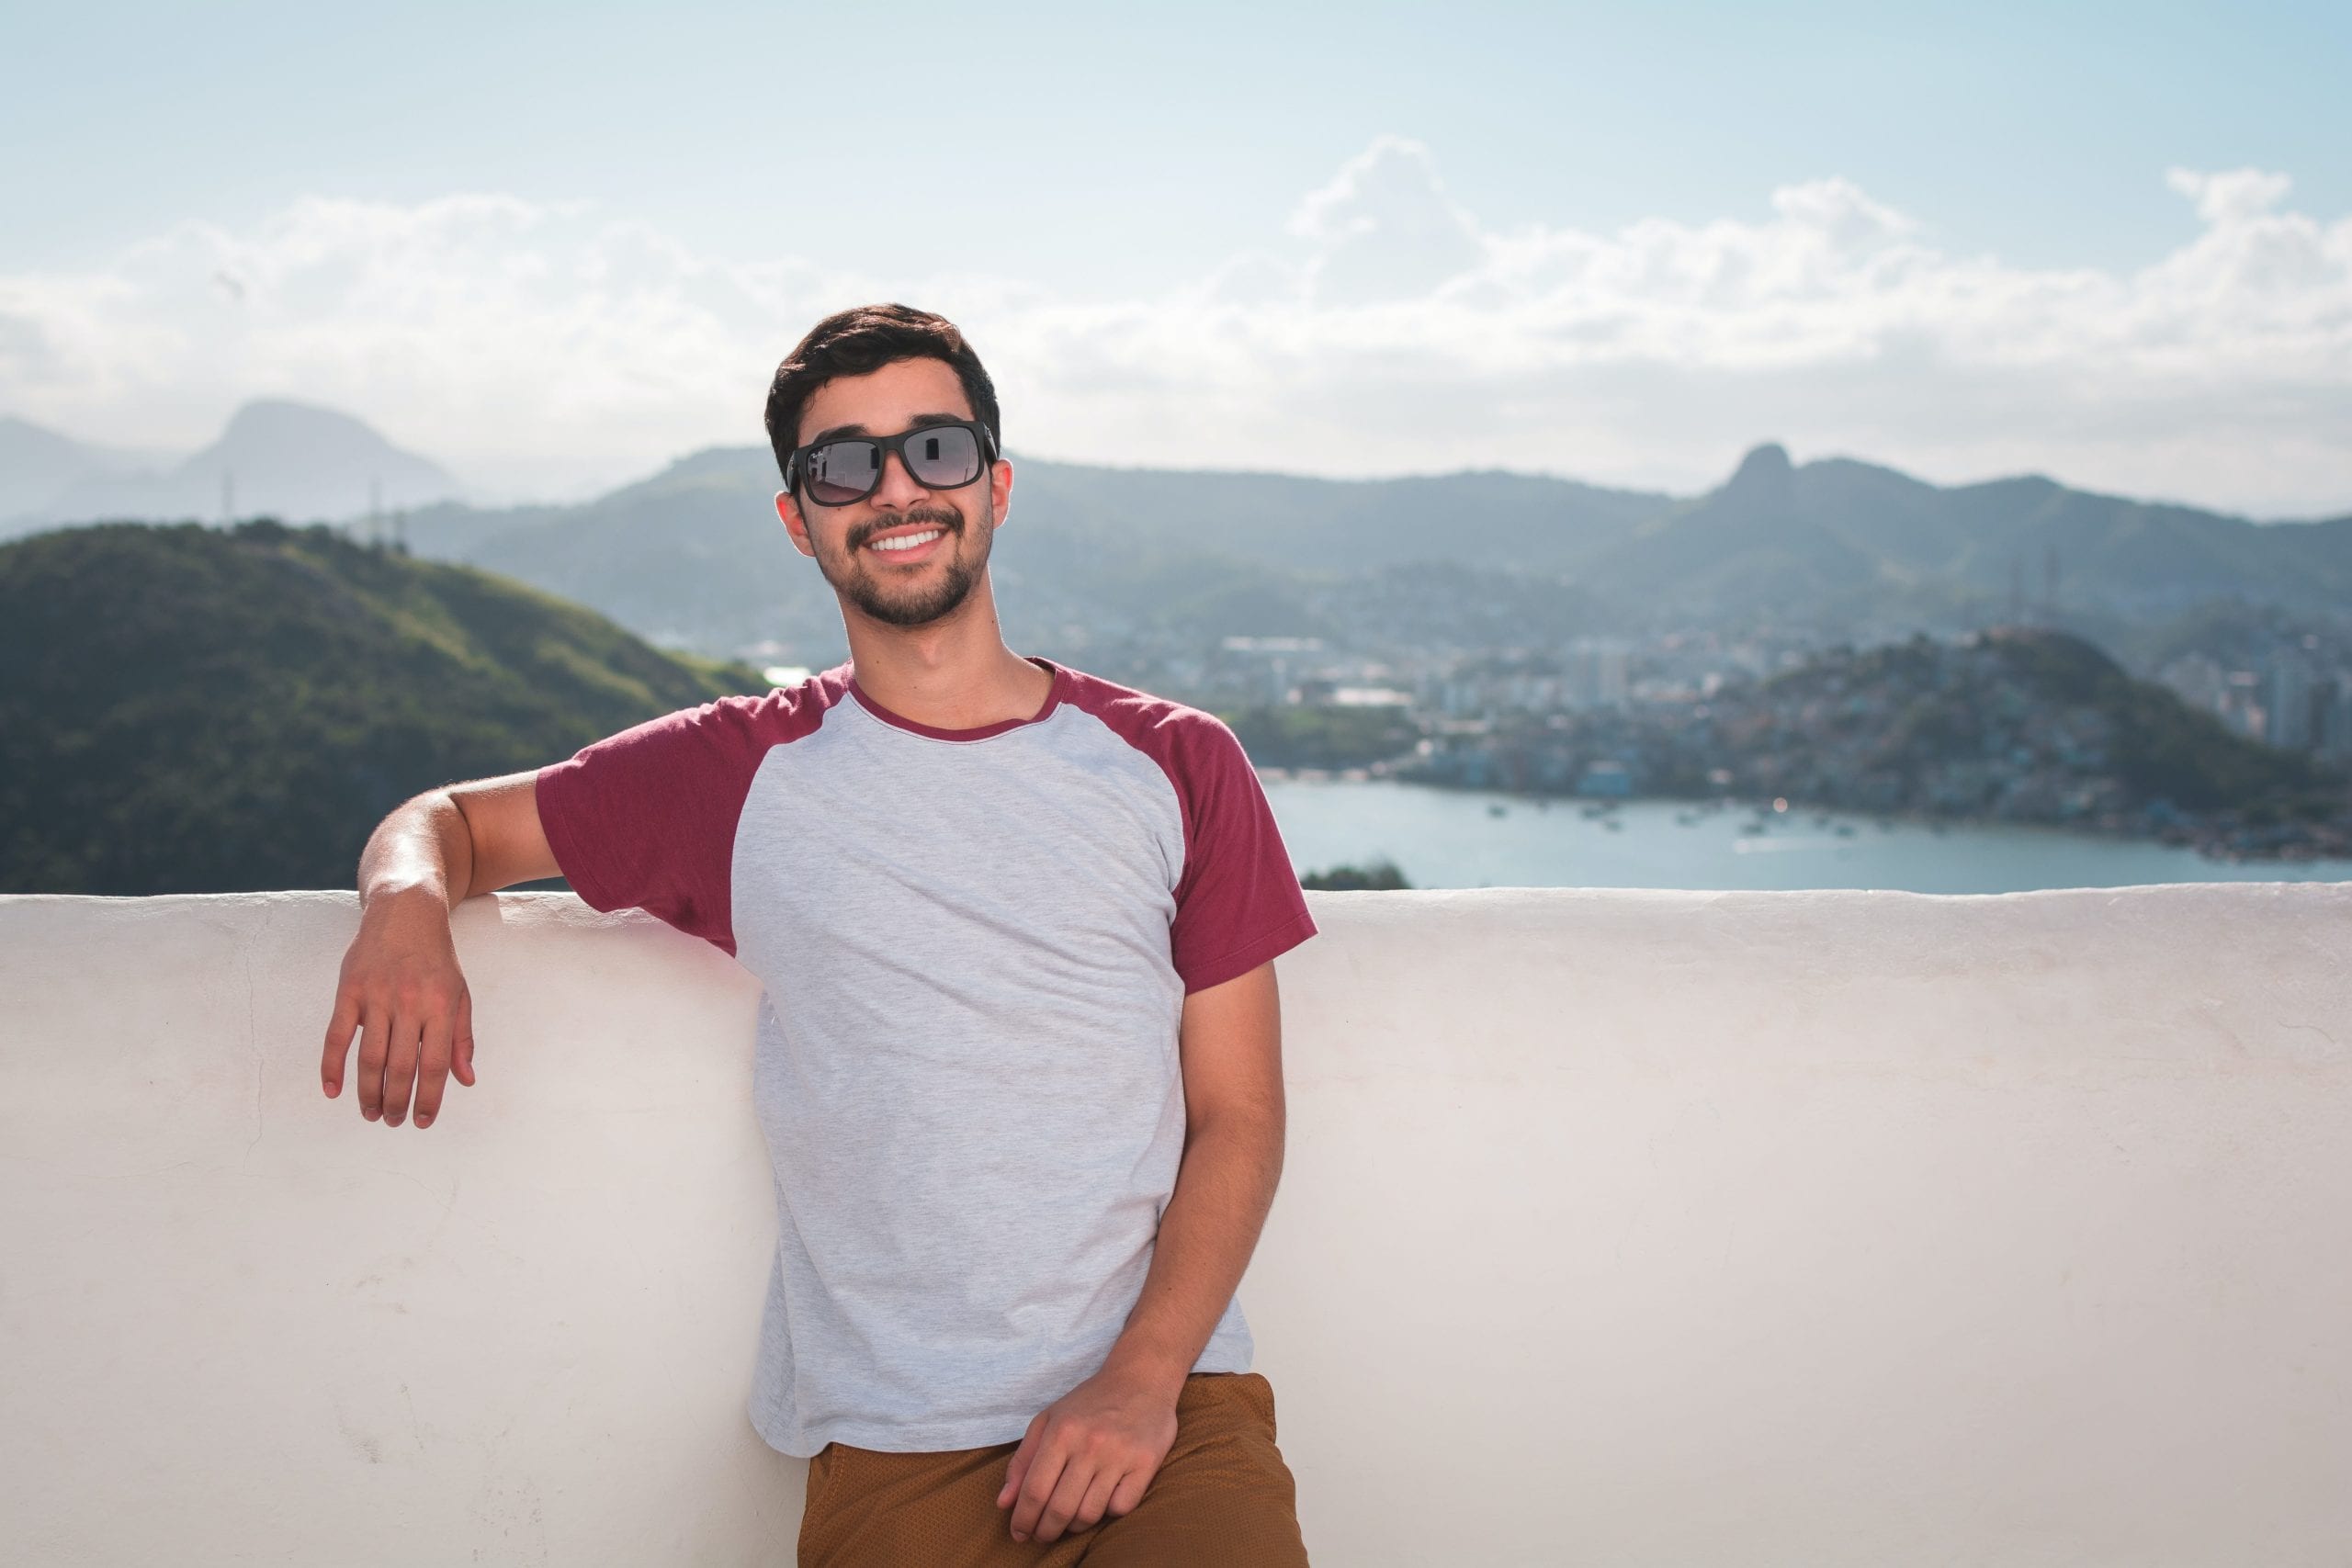 Man smiling who is taking PrEP for HIV standing in front of a mountain view.